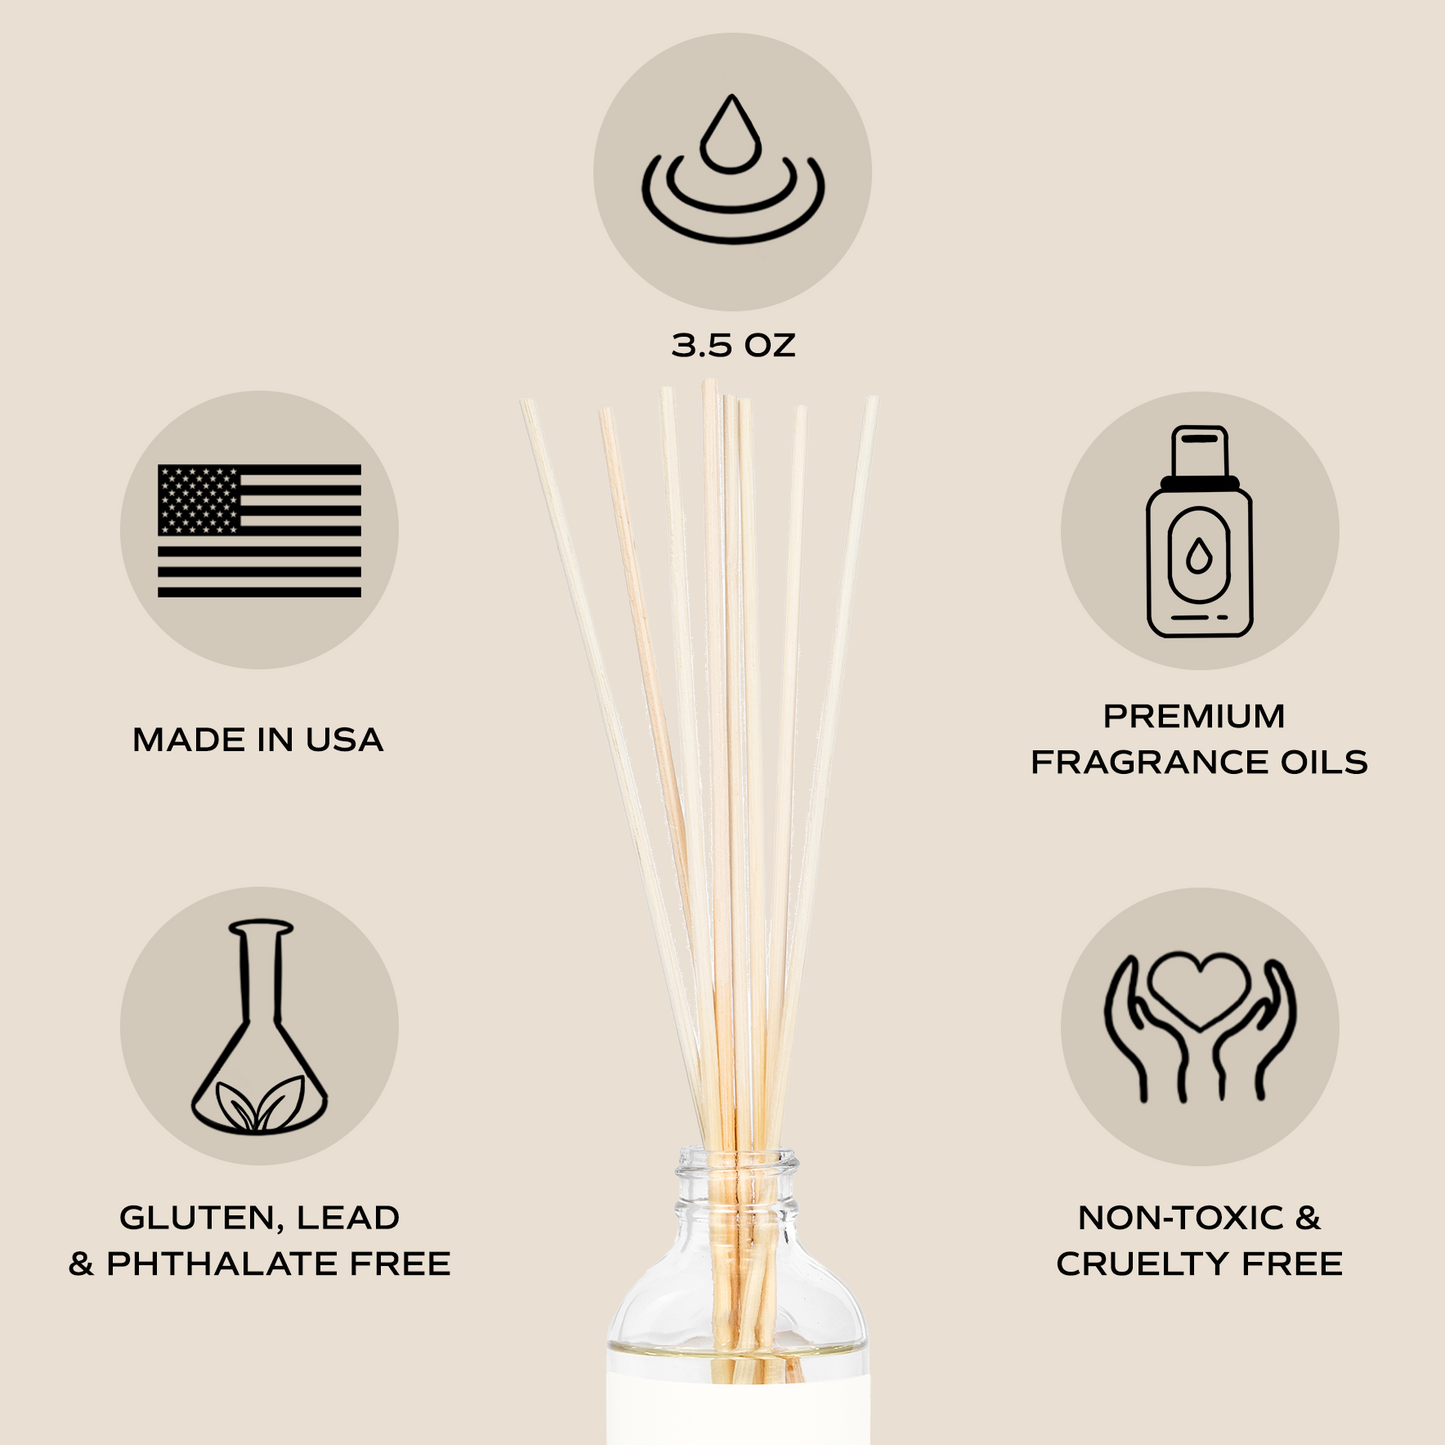 Sandalwood Rose Clear Reed Diffuser